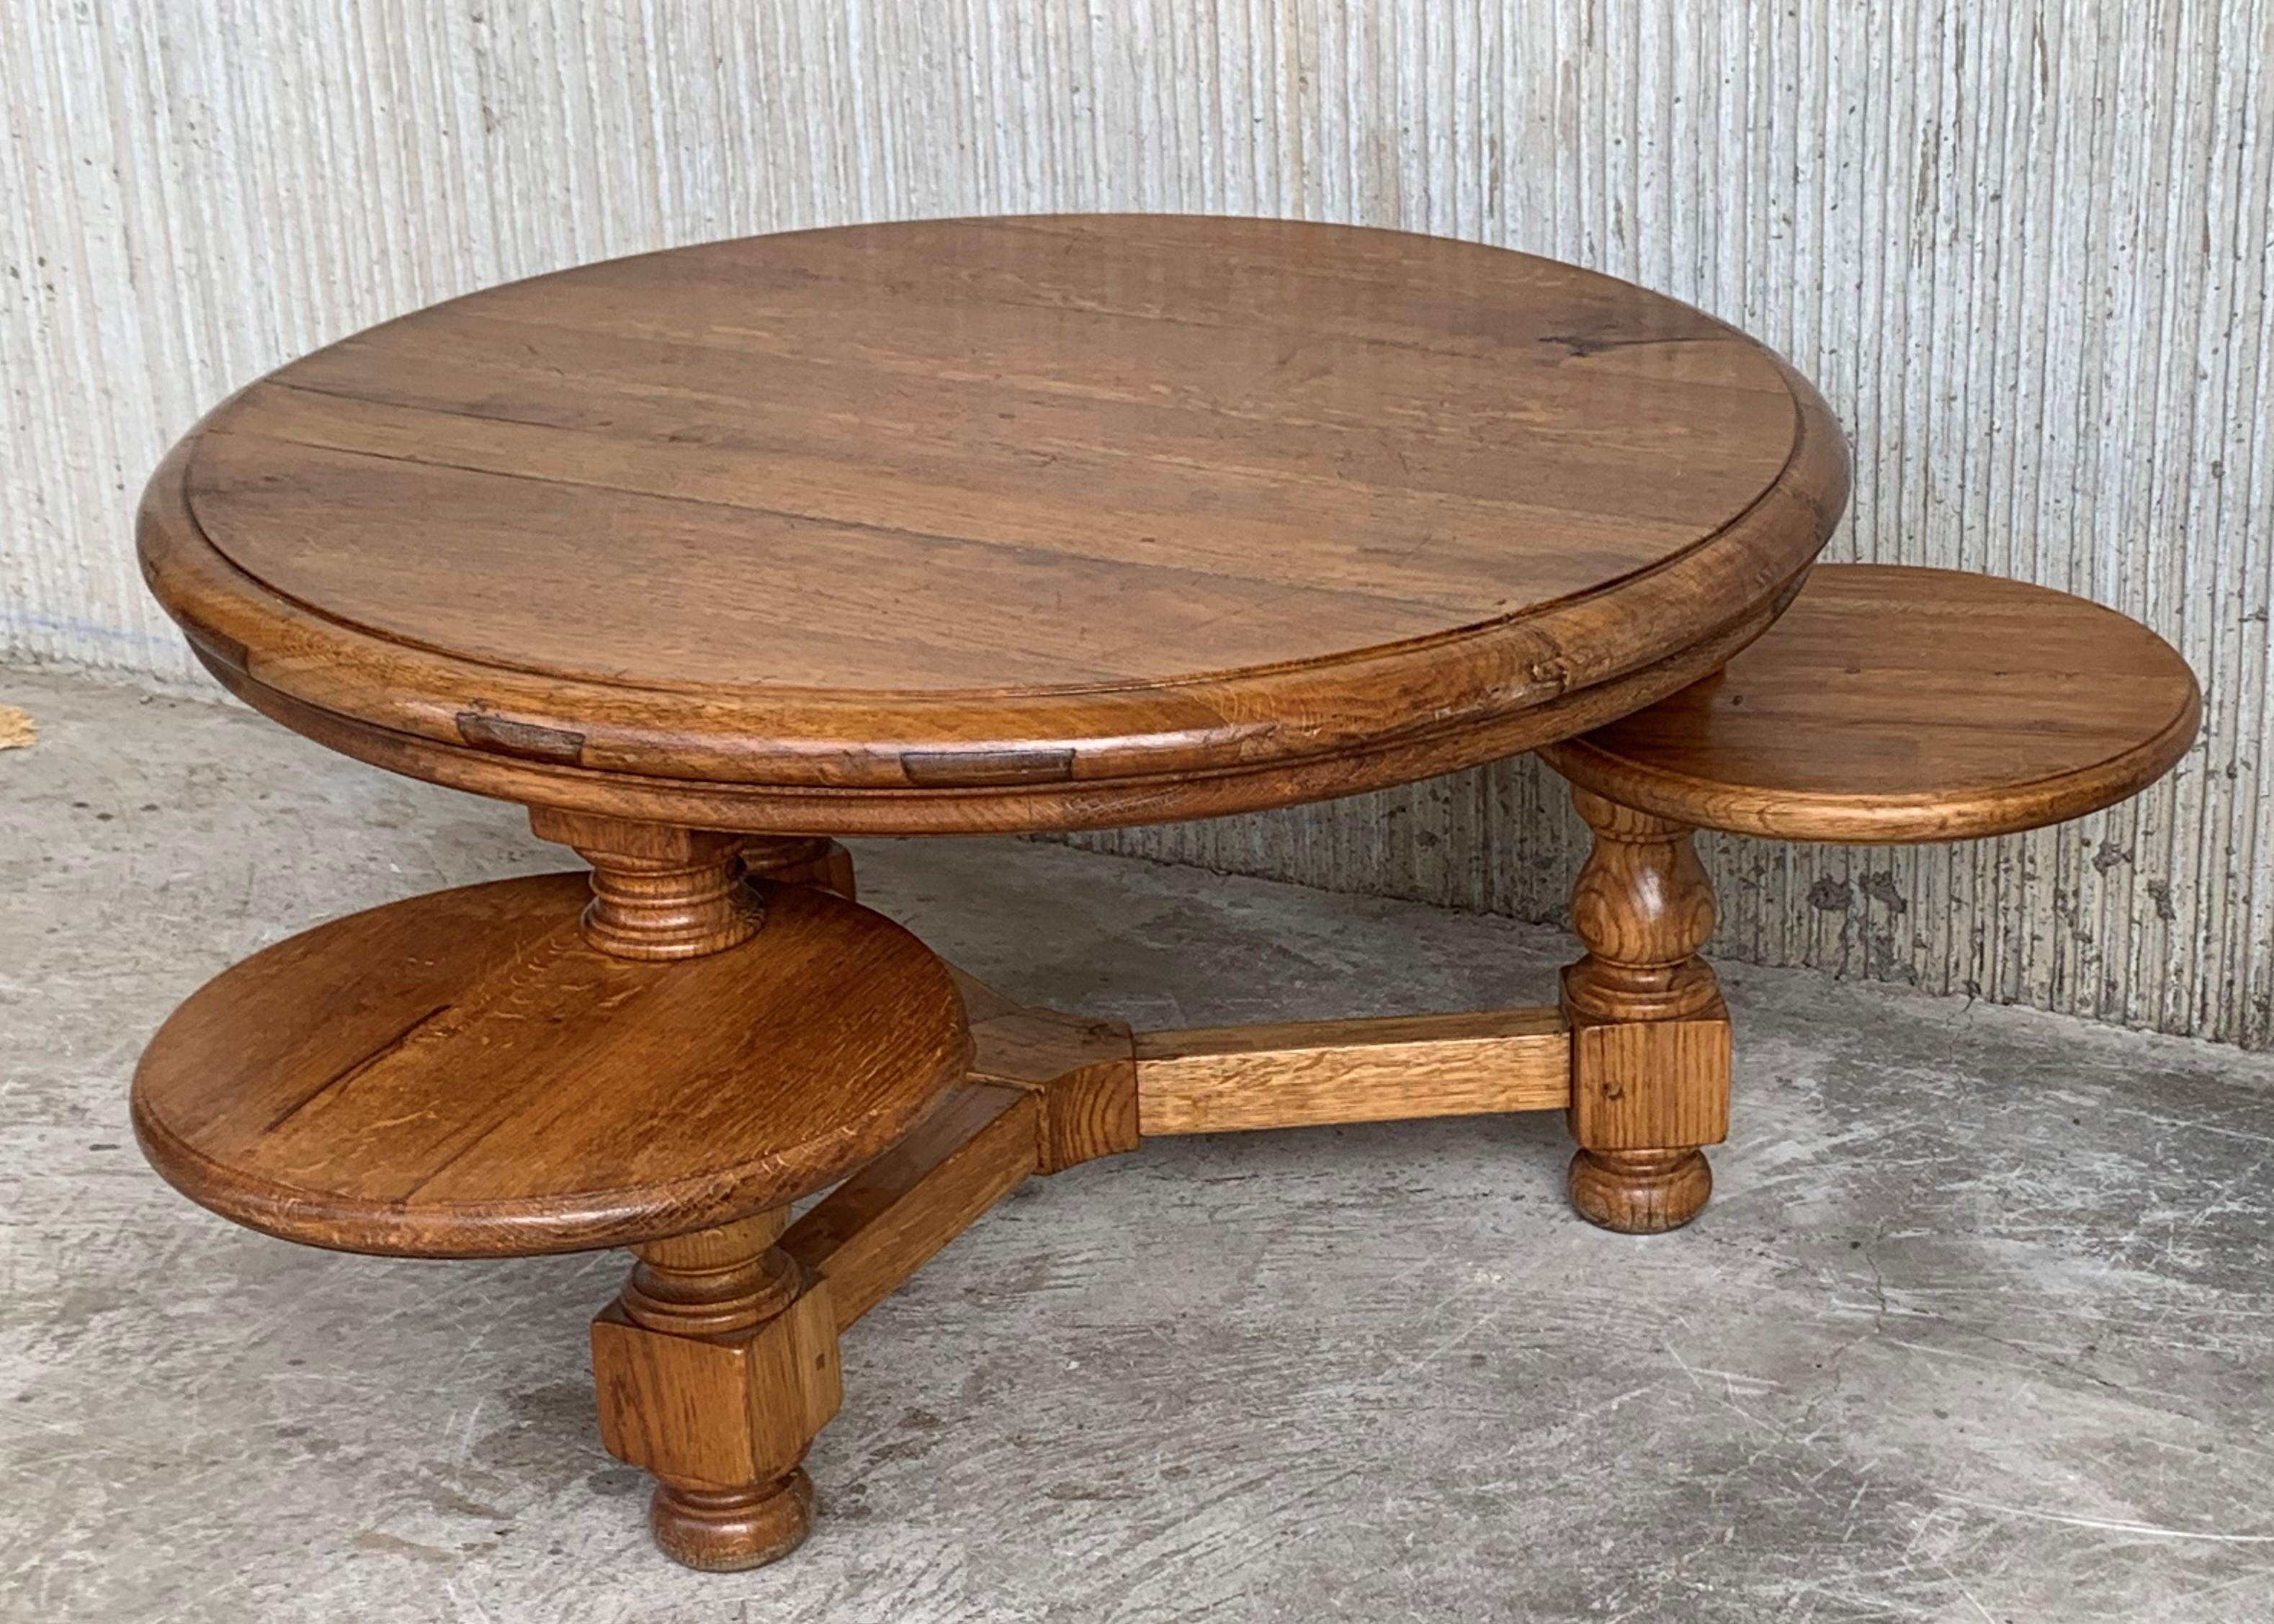 Spanish 20th Round Country Coffee or Picnic Table with Three Auxiliars Tables or Stools